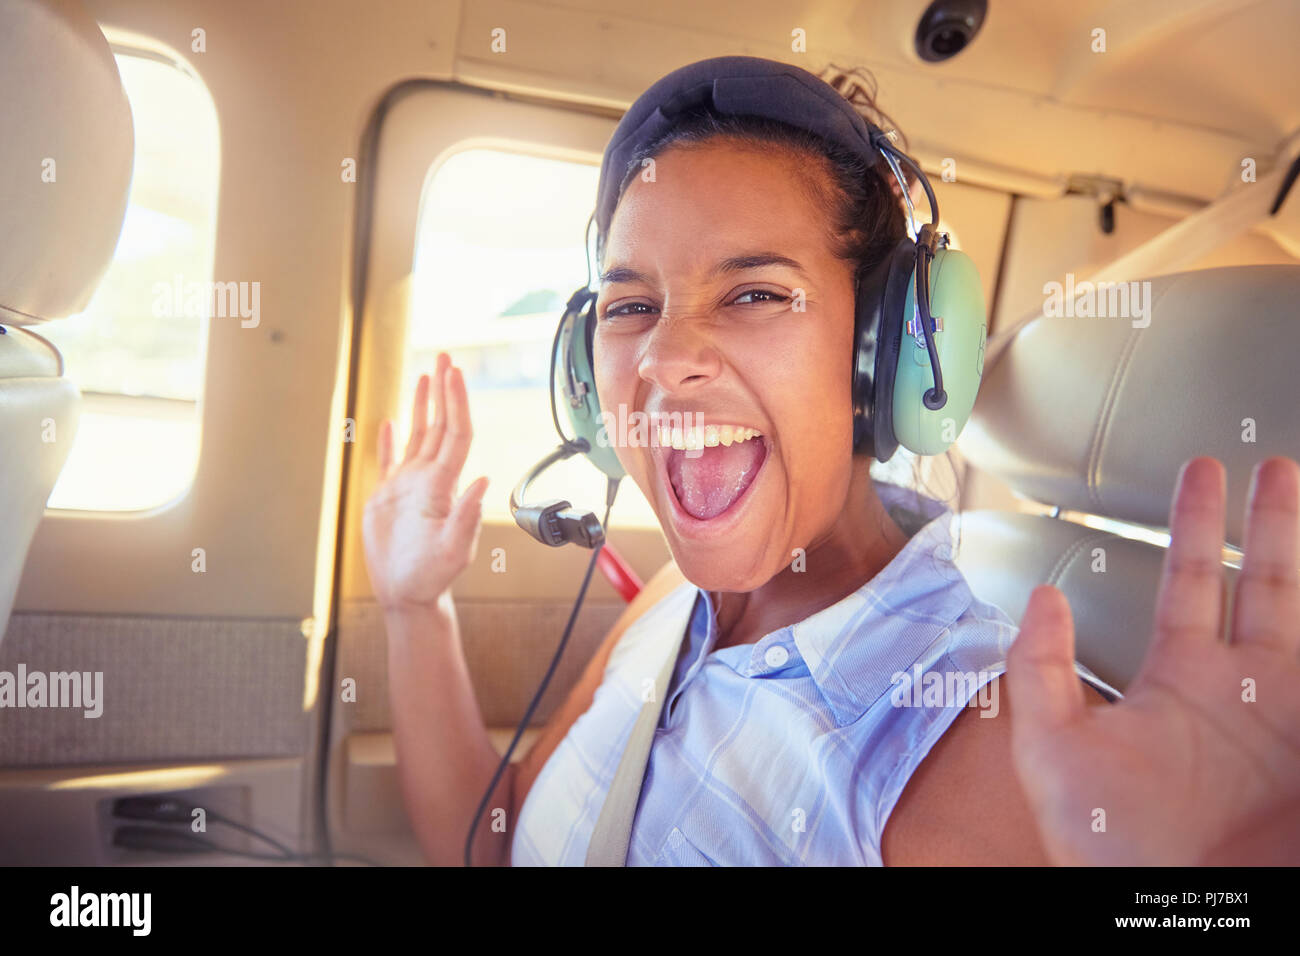 Portrait enthusiastic young woman with headphones riding in airplane Stock Photo